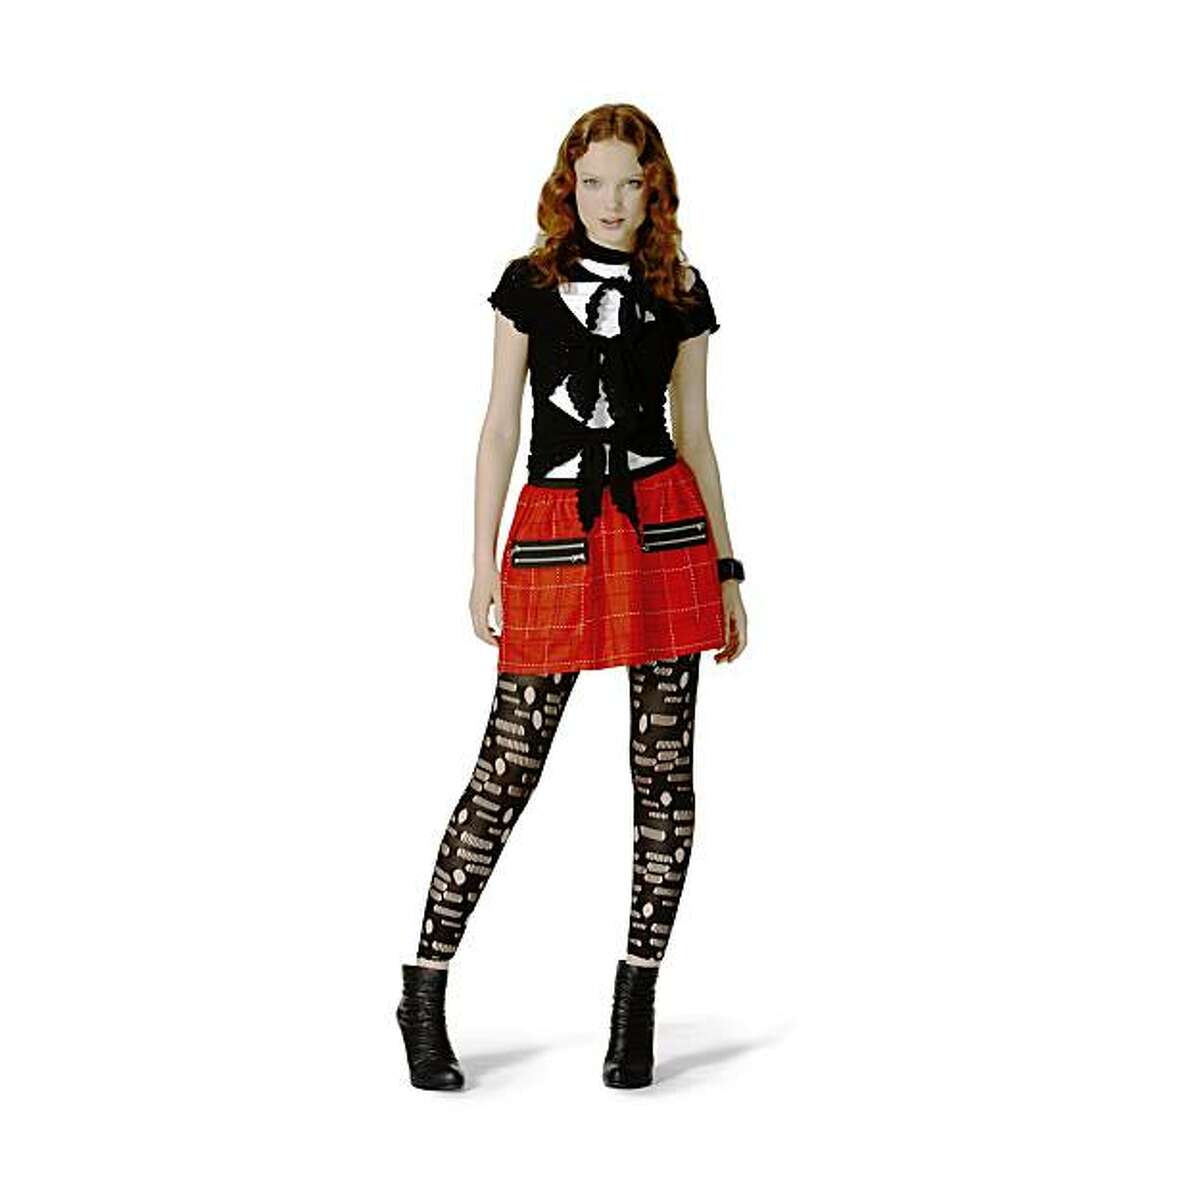 Anna Sui for Target Jenny-inspired look: Tulle tie-front top in black ($19.99), Tattersall skirt in red ($29.99) and hole leggings in black ($19.99).